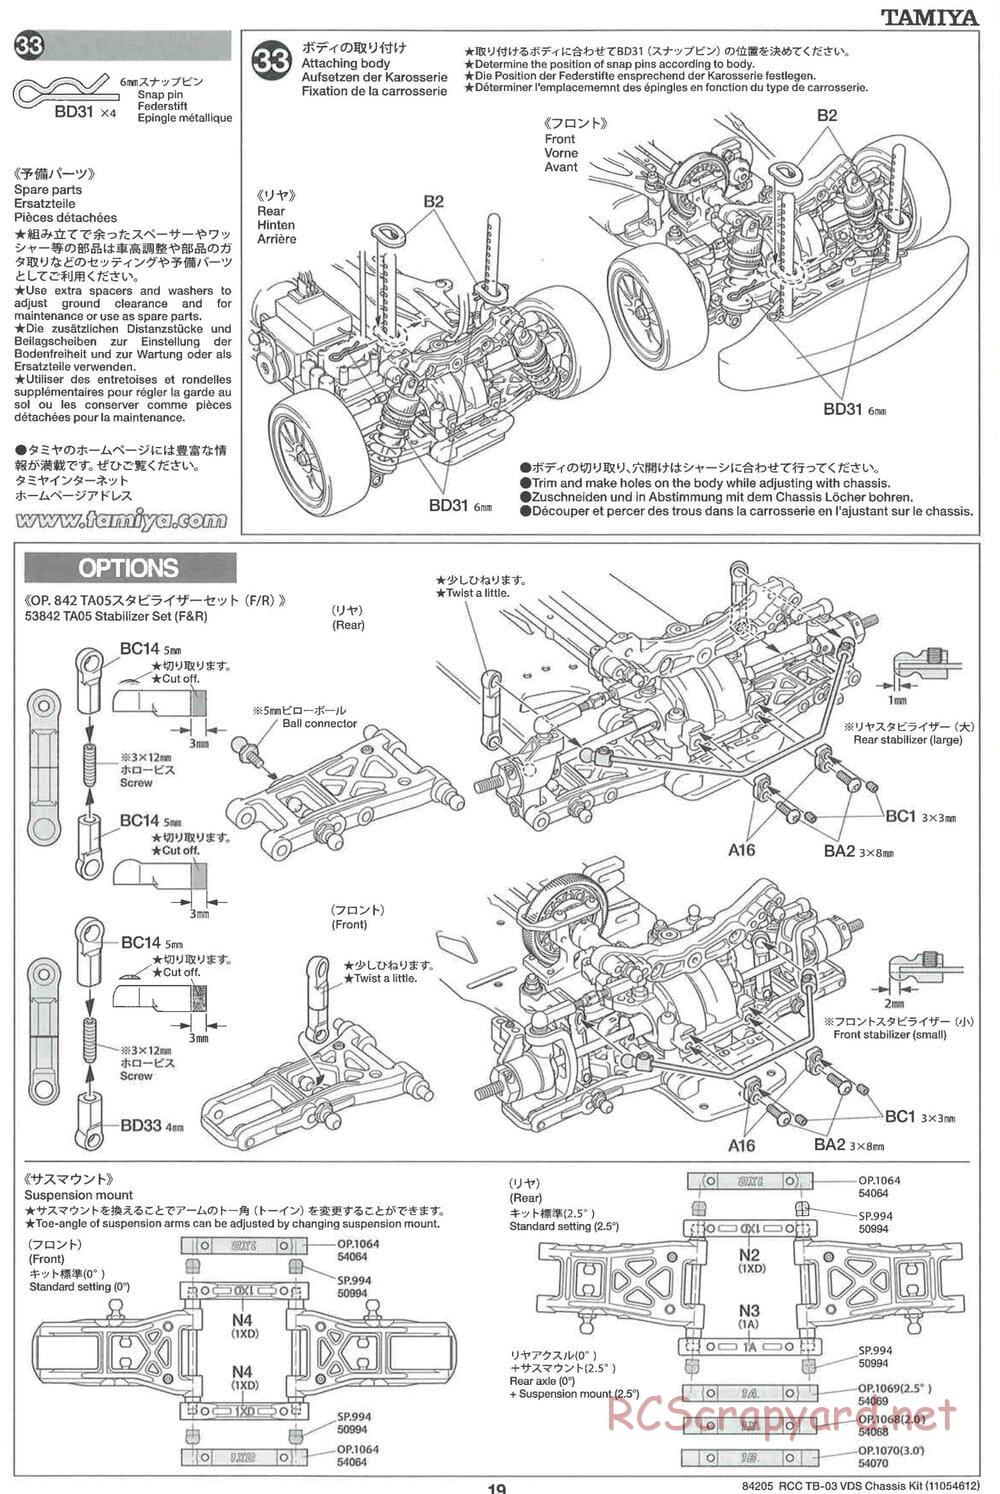 Tamiya - TB-03 VDS Drift Spec Chassis - Manual - Page 19